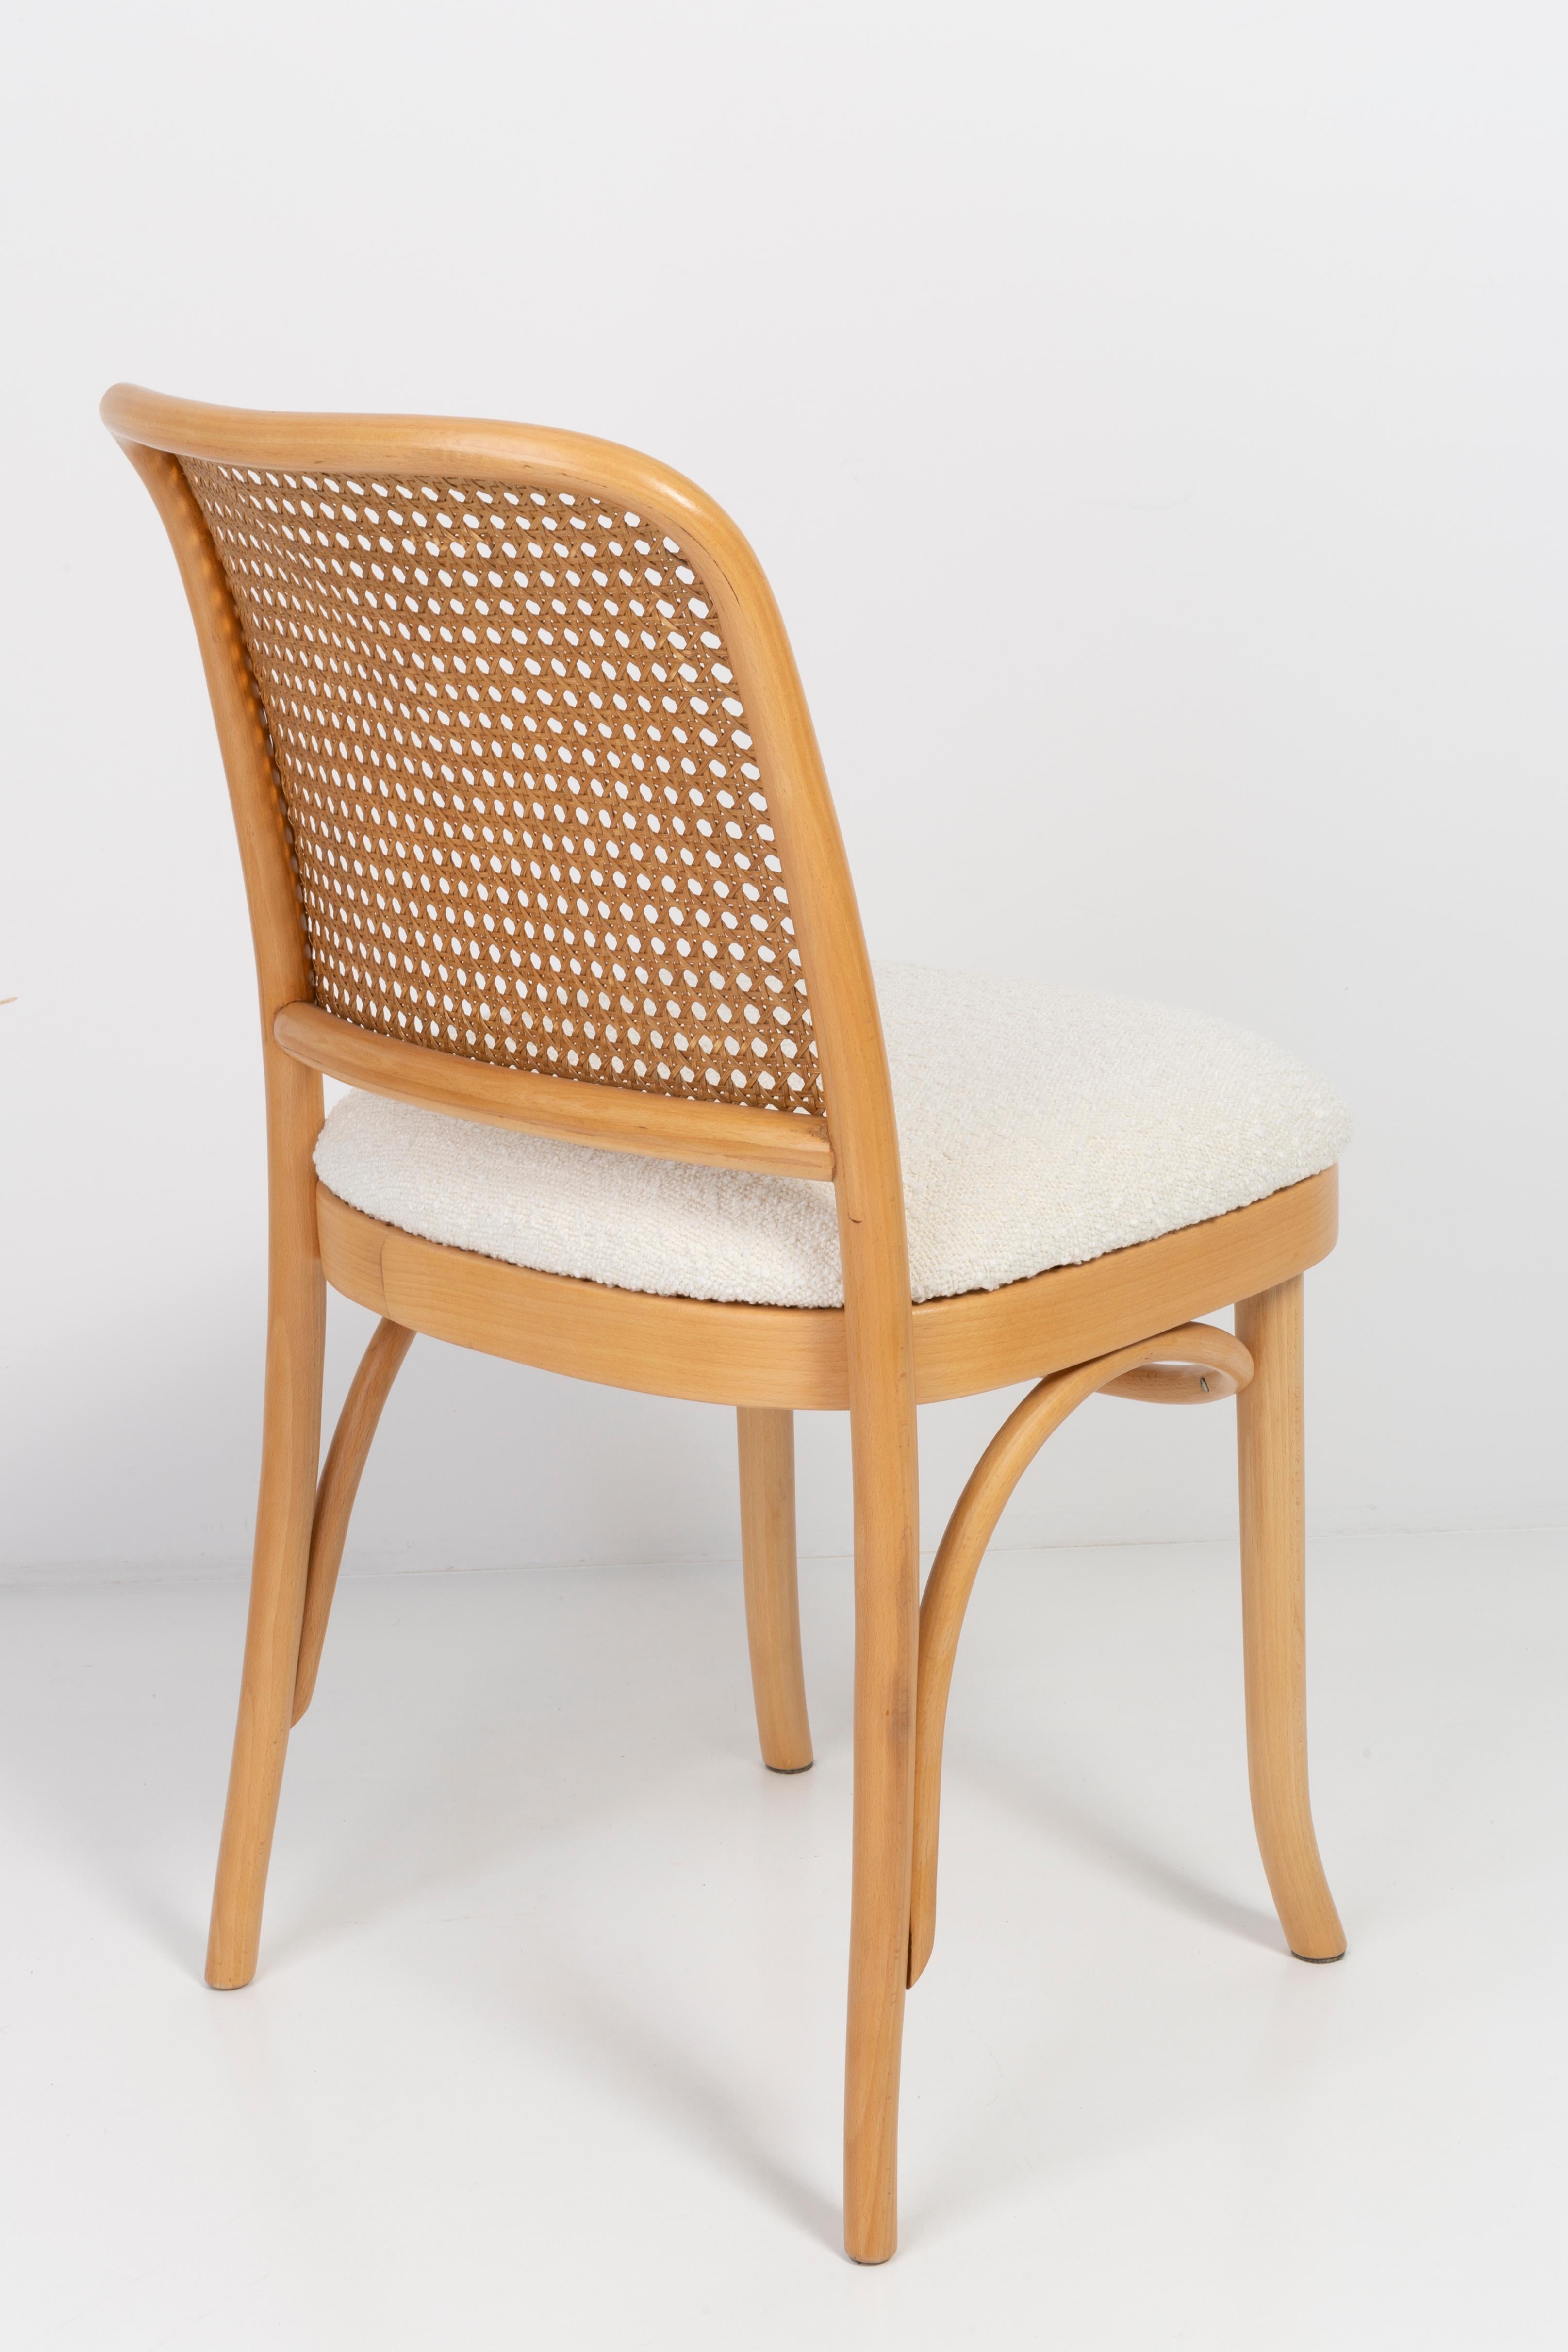 Set of Six White Boucle Thonet Wood Rattan Chairs, 1960s For Sale 6